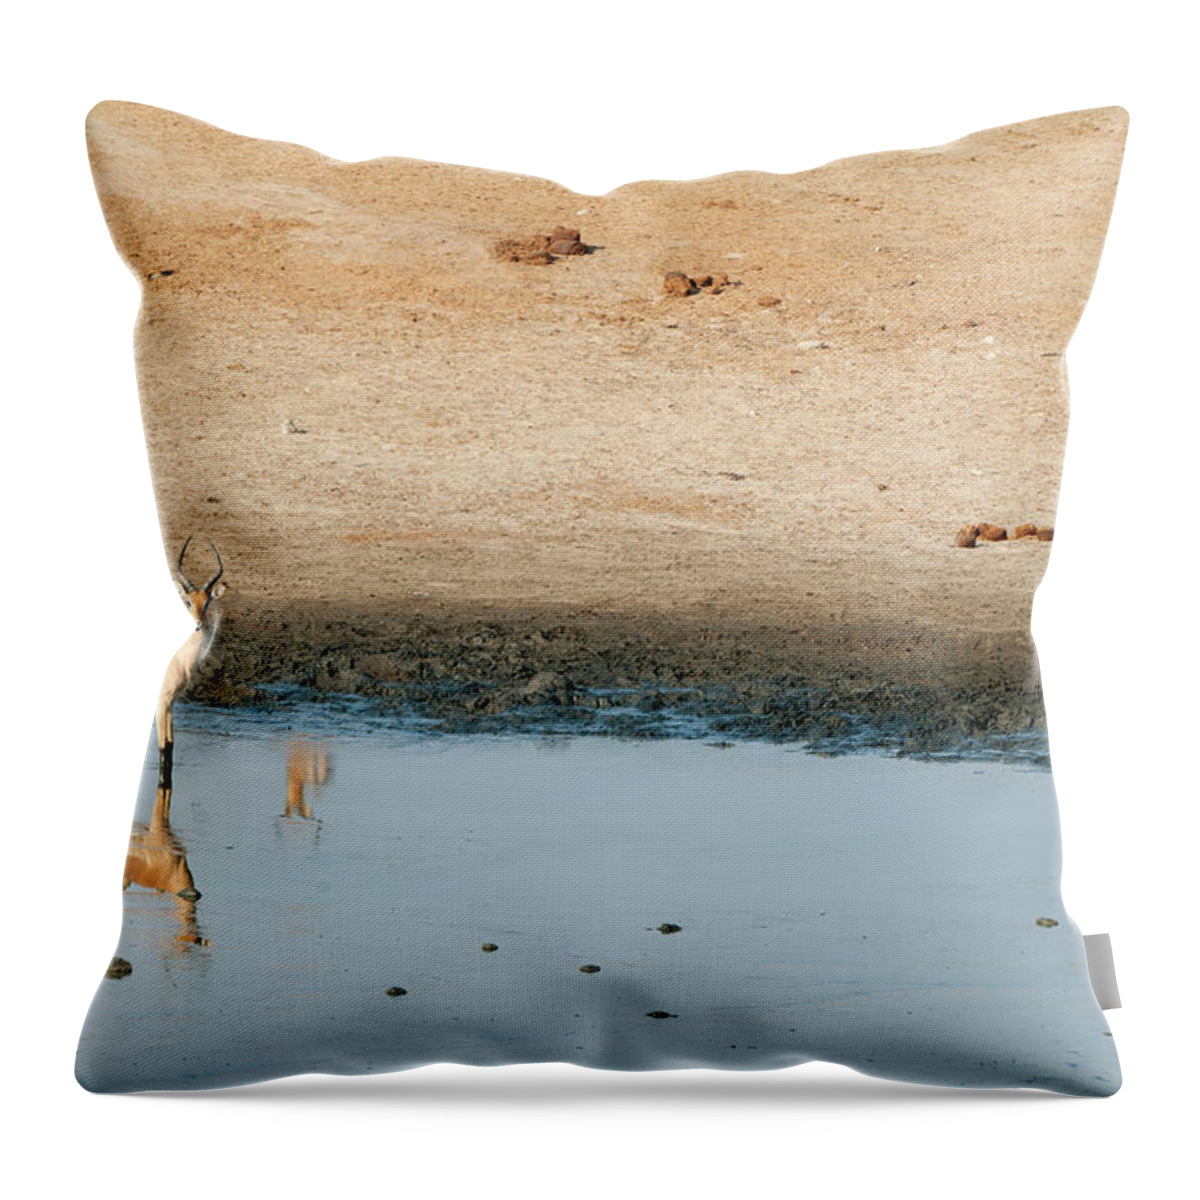 Tranquility Throw Pillow featuring the photograph Antelope At Water Hole, Masuma Pan by Christopher Scott